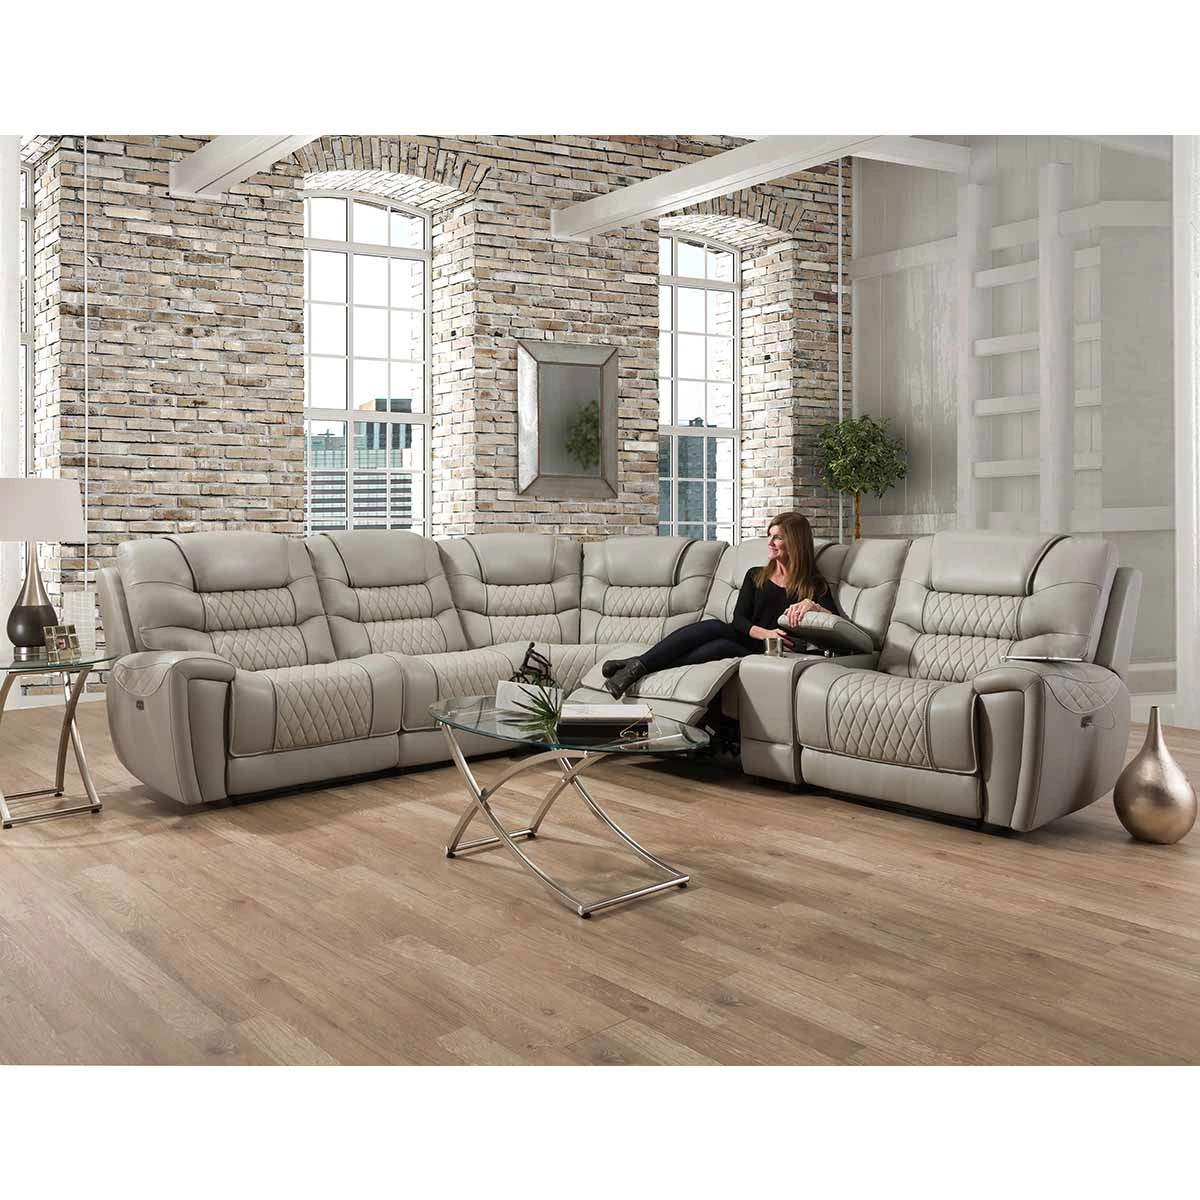 The Corinthian Furniture Breckenridge 3-piece powered L-shaped sectional 